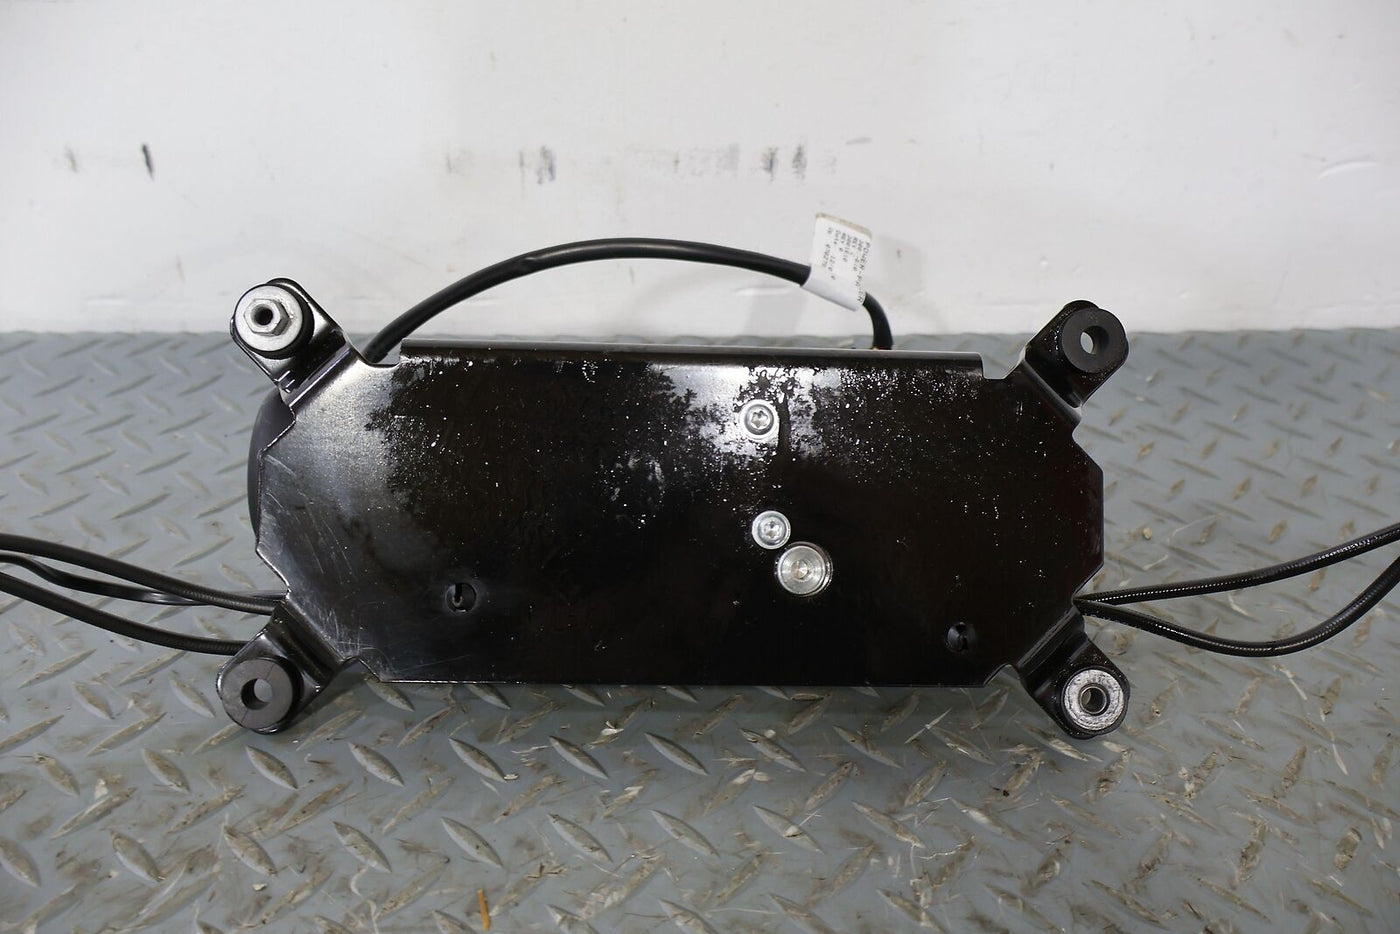 11-15 Chevy Camaro SS Convertible Lift Motor W/ Lines & Cylinders (Tested) 36K